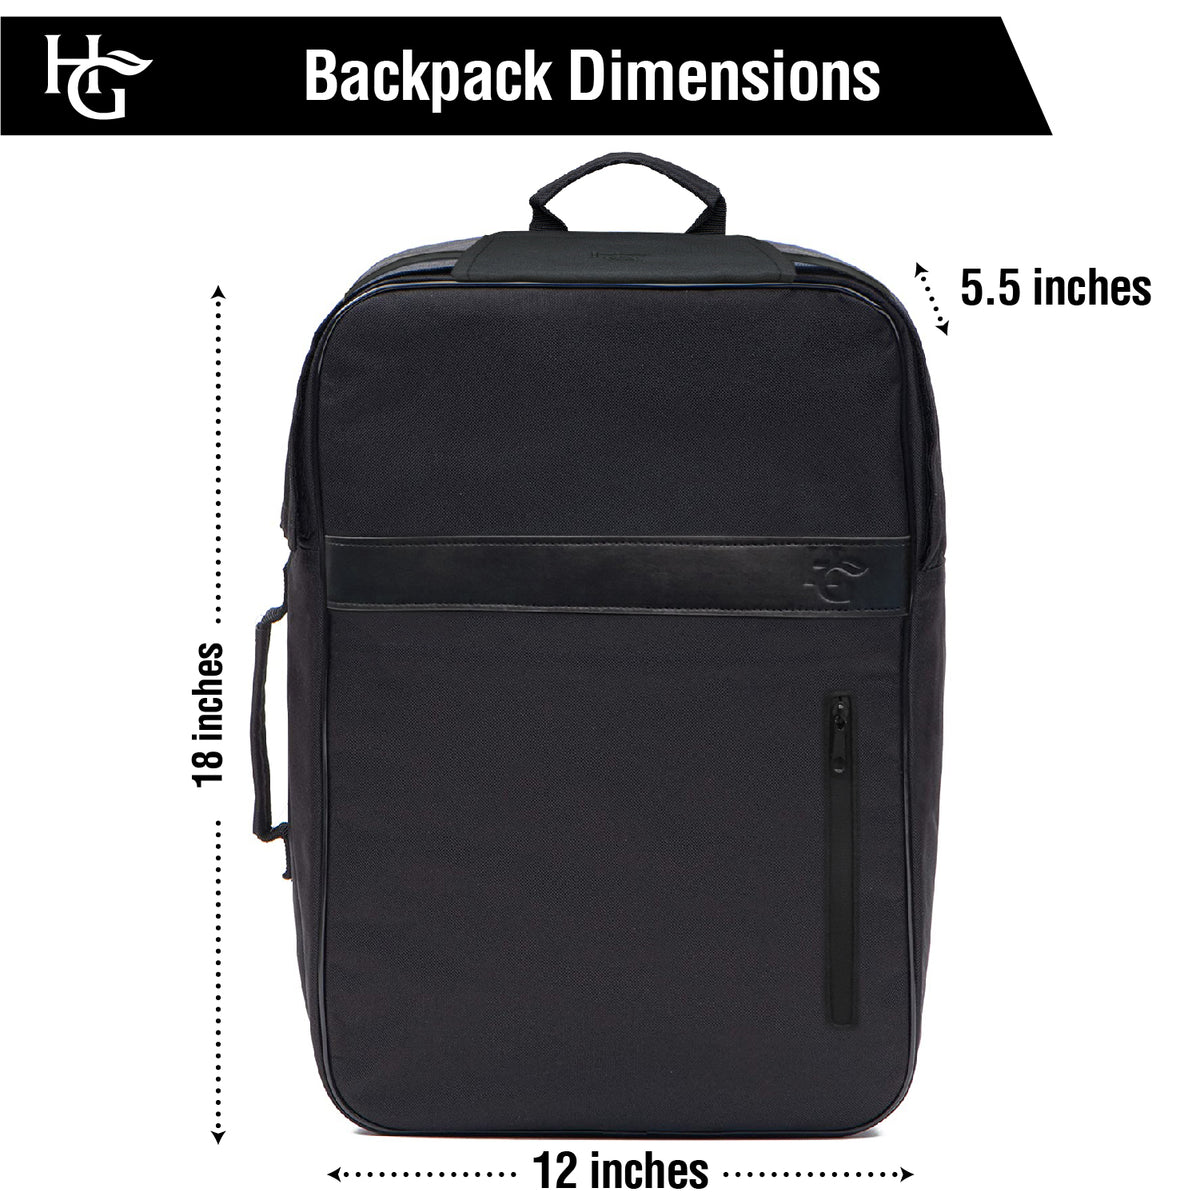 Premium Smell Proof Backpack with a Built In Combo Lock - XL Size ...